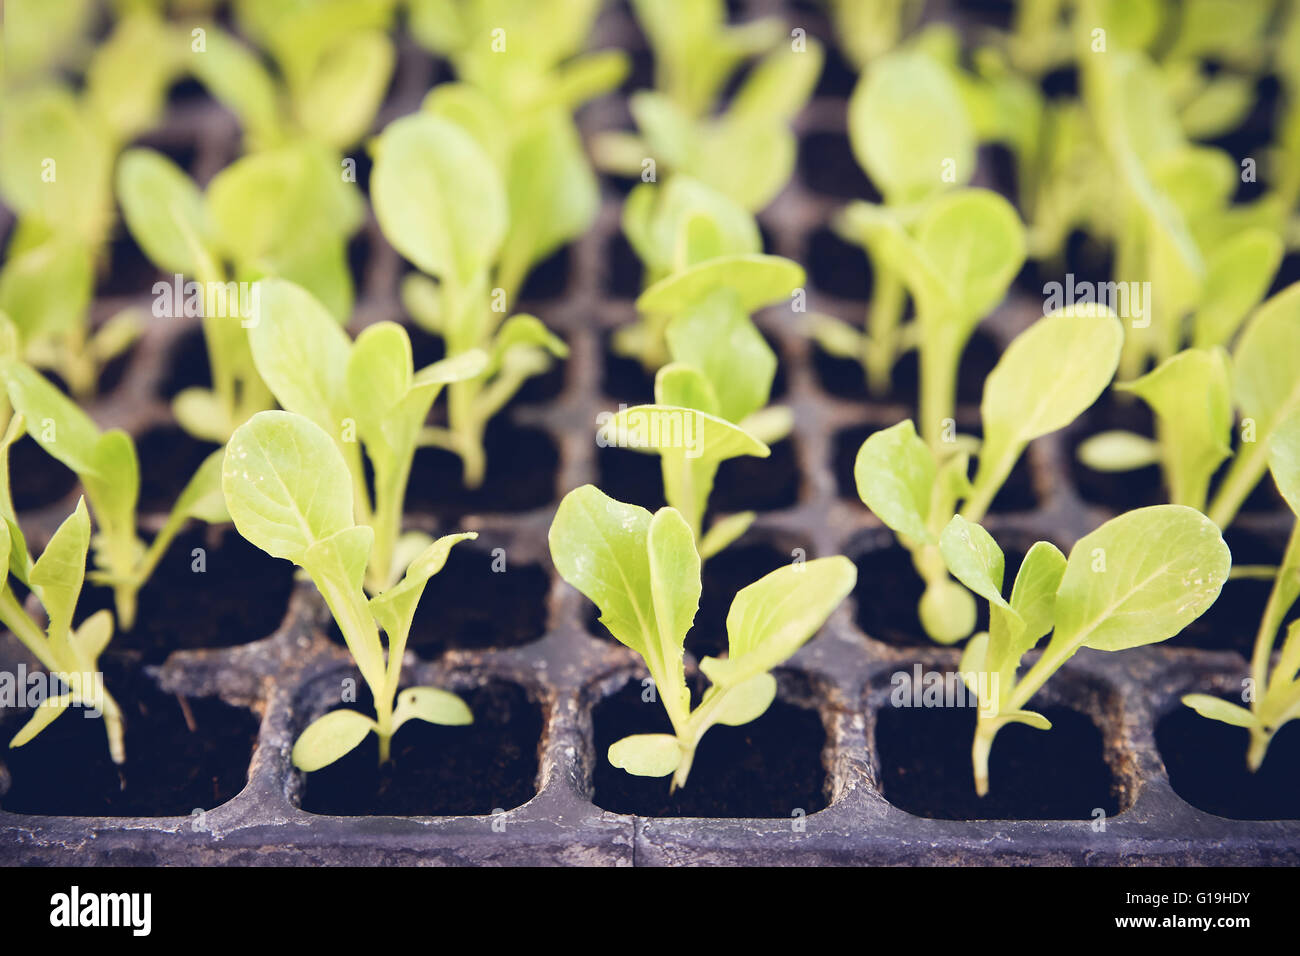 young organic plants in nursery tray Stock Photo